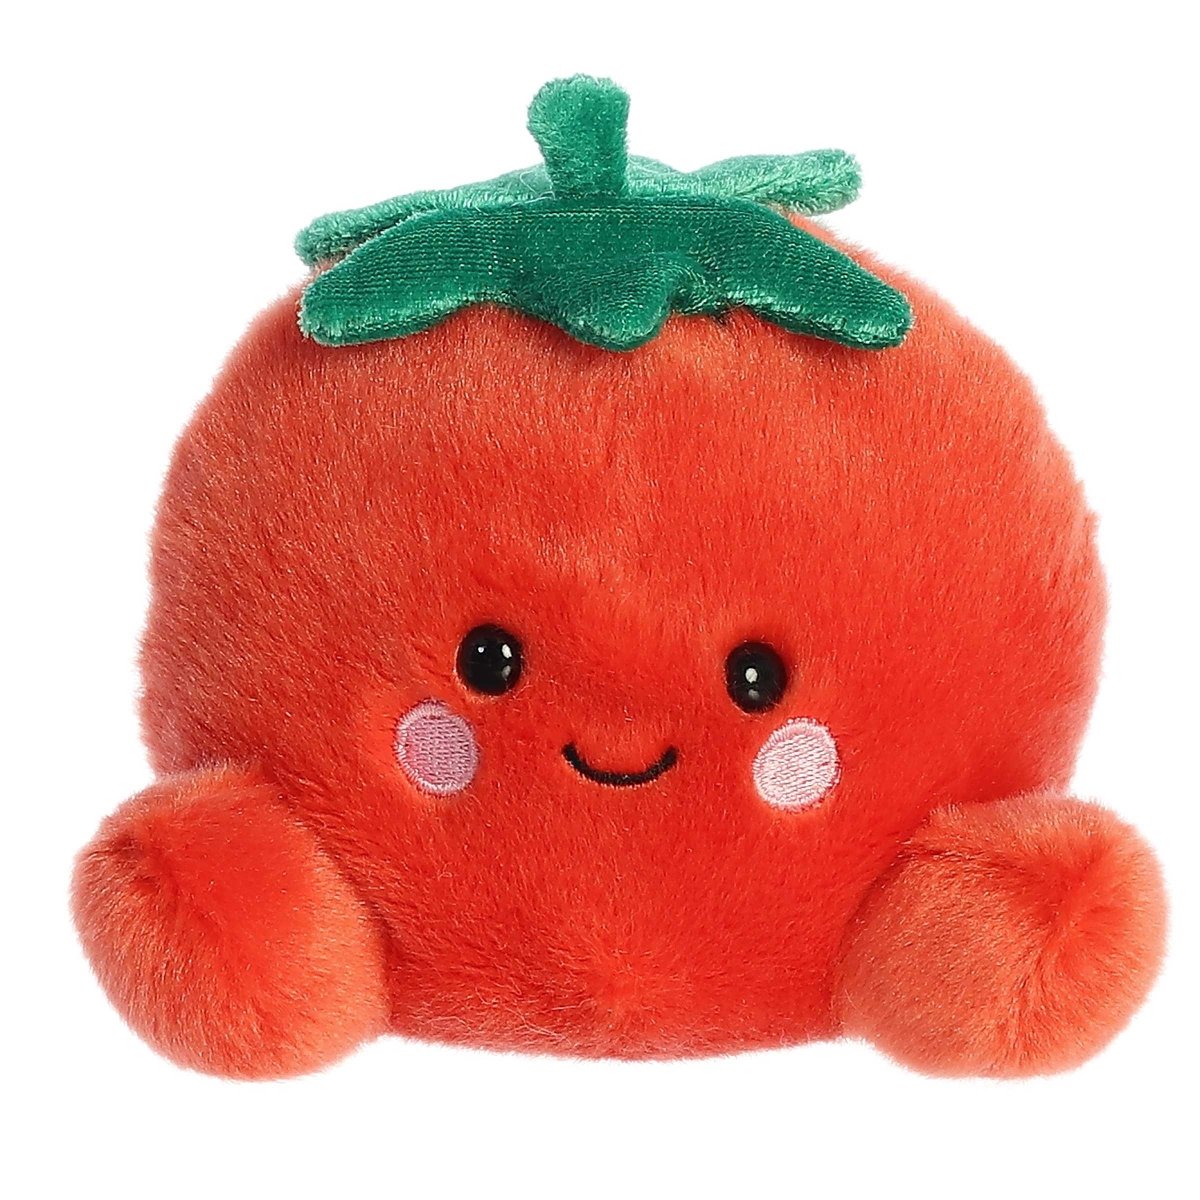 Palm Pals 5 Inch Boyd the Tomato Plush Toy